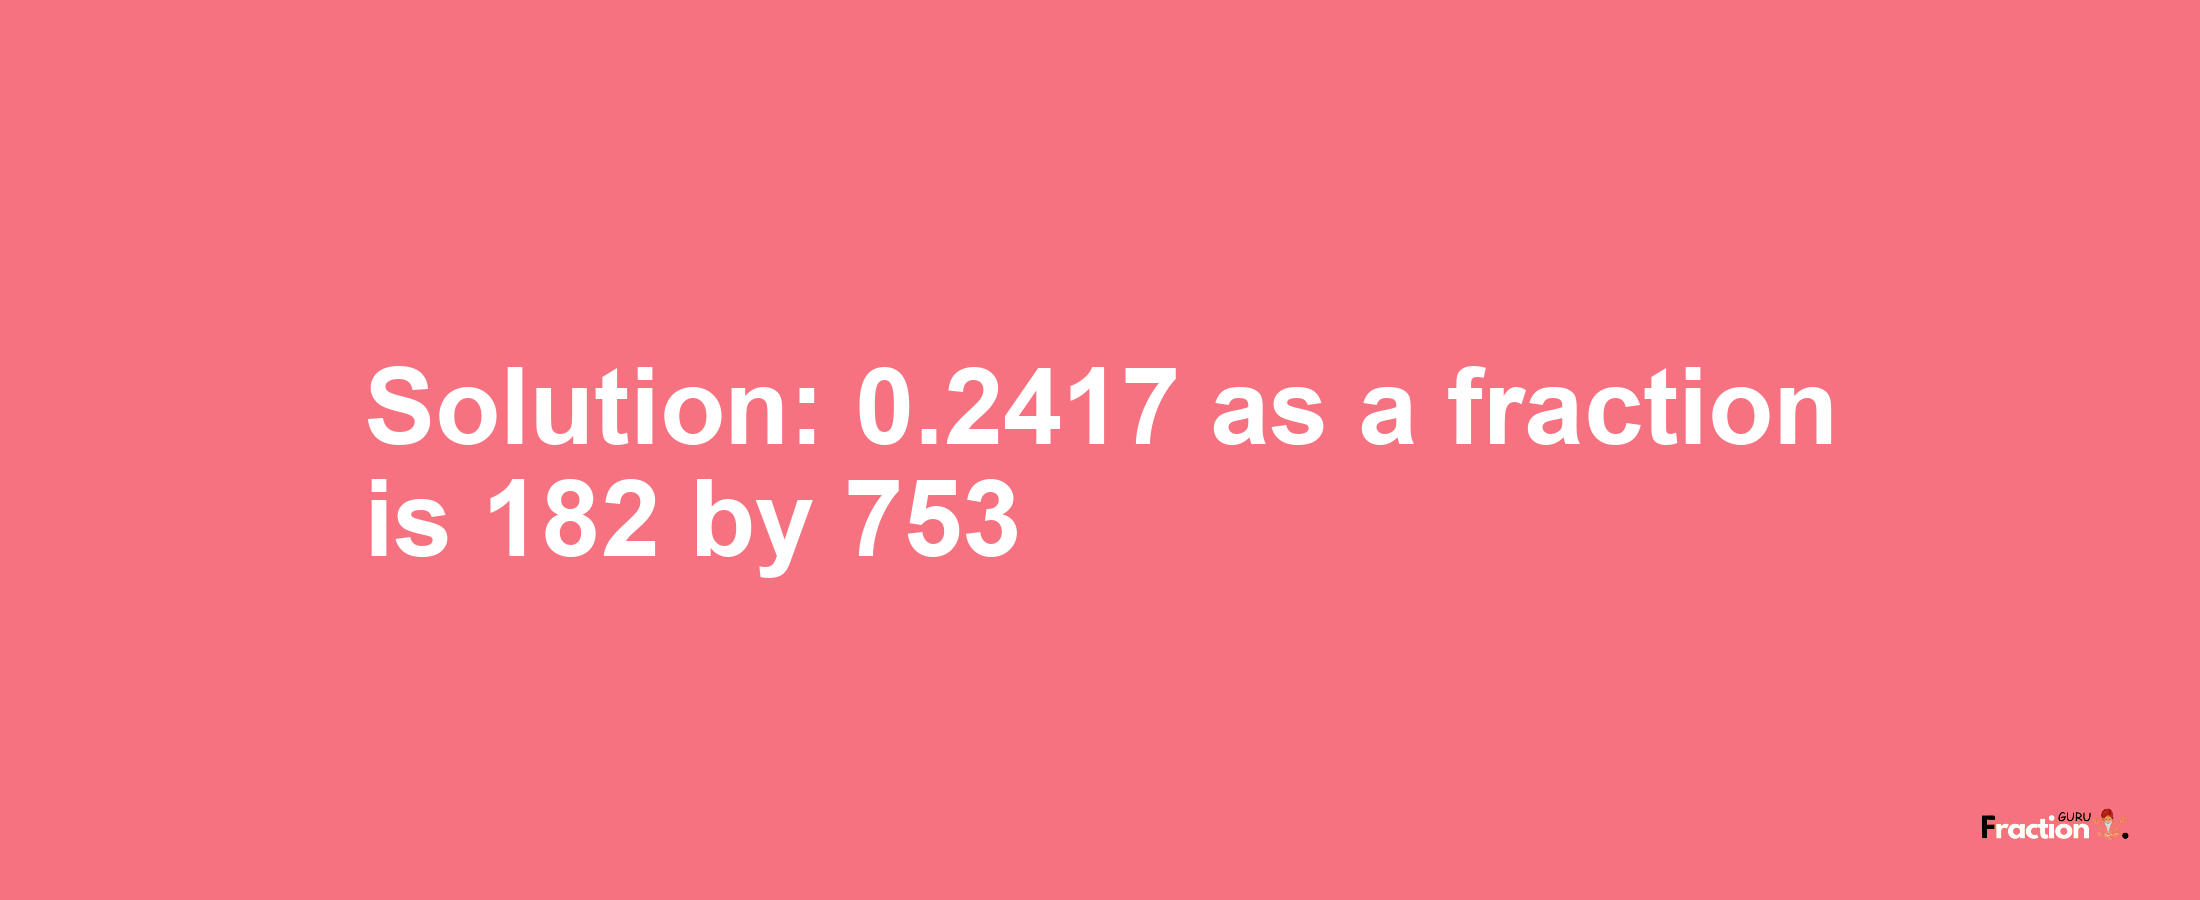 Solution:0.2417 as a fraction is 182/753